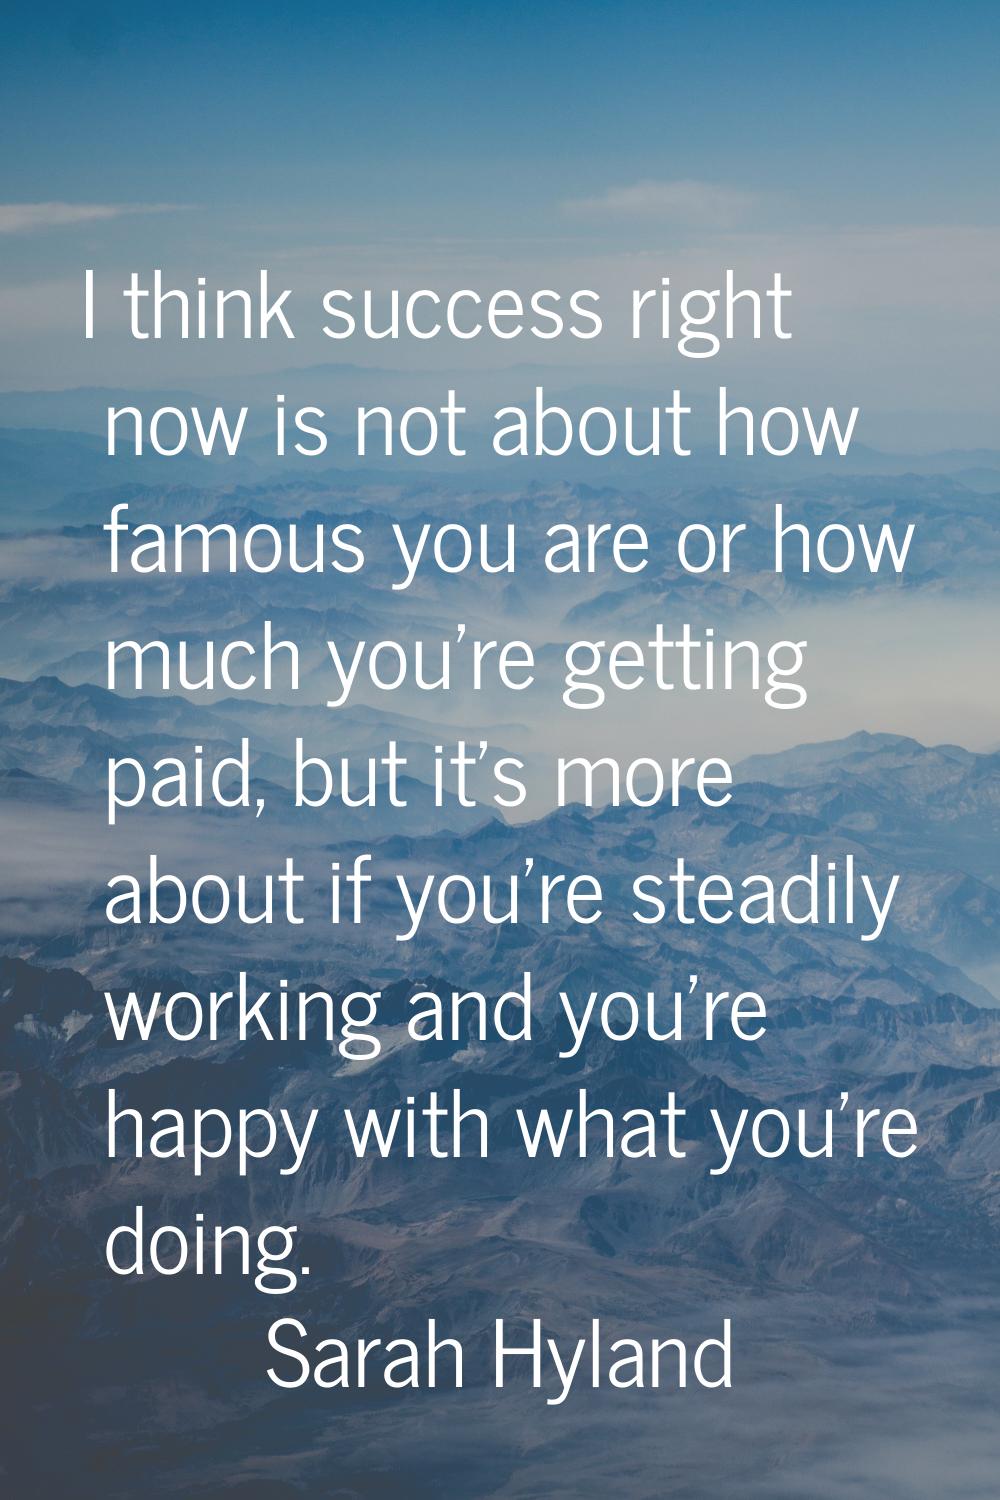 I think success right now is not about how famous you are or how much you're getting paid, but it's